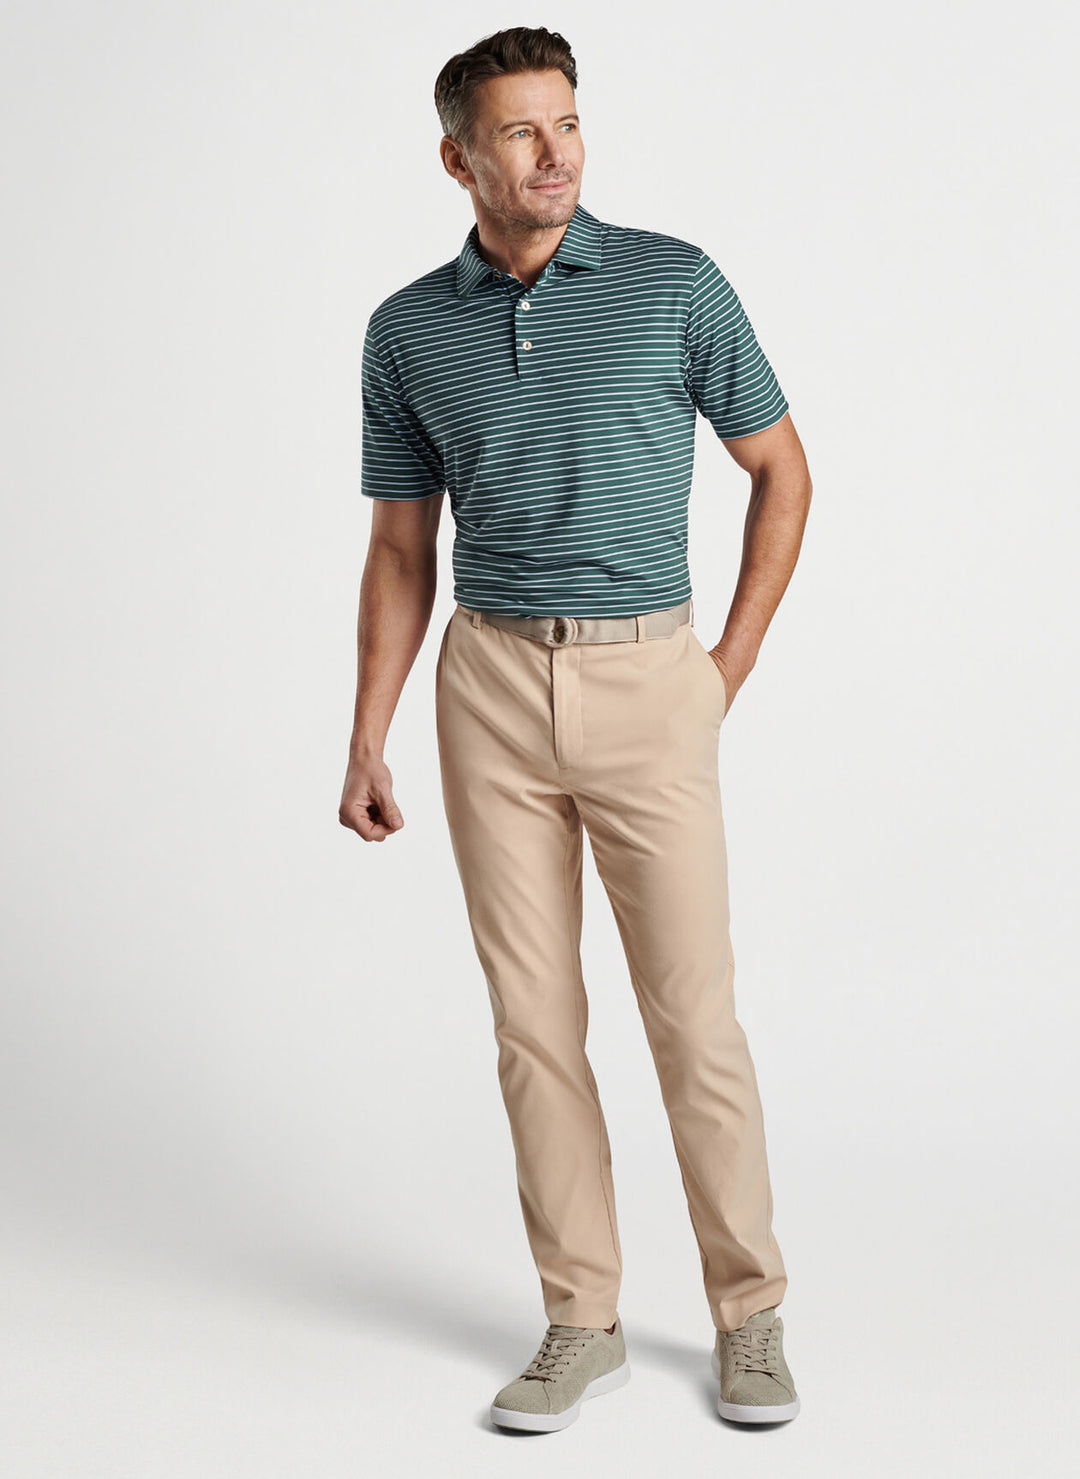 Peter Millar Drum Performance Jersey Polo In Balsam